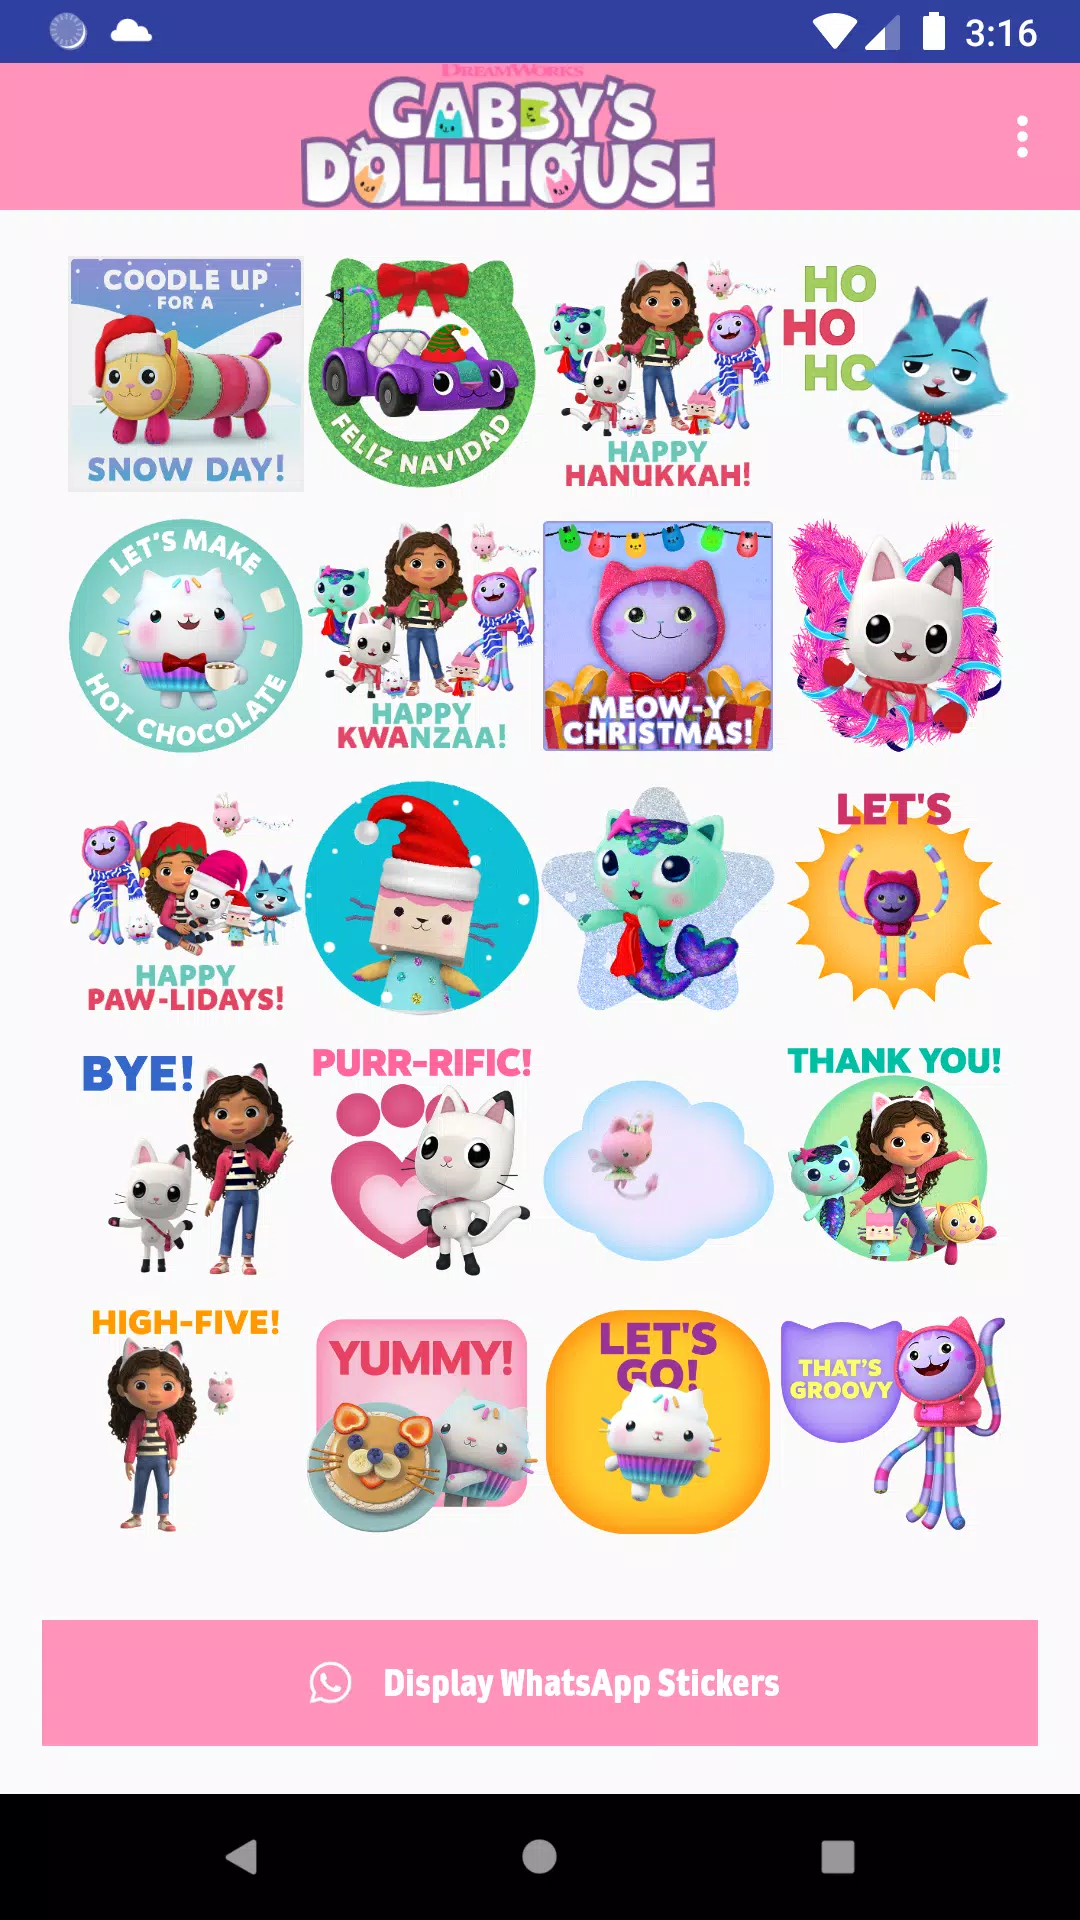 Chill Out What Sticker by DreamWorks Animation for iOS & Android